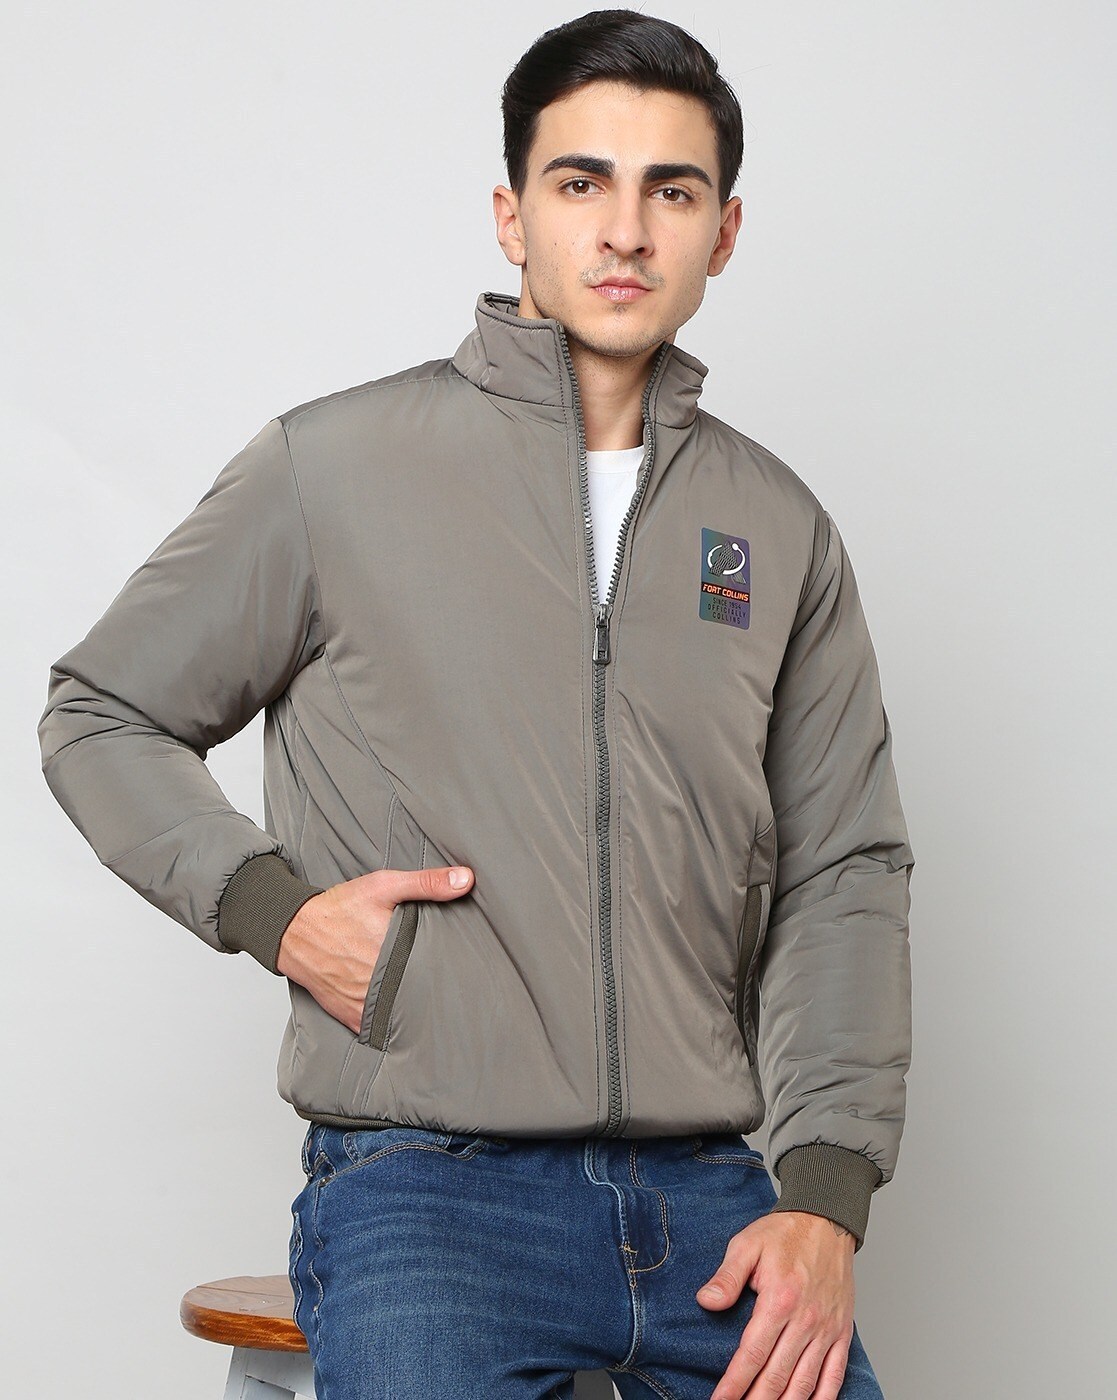 Qube By Fort Collins Mens Bomber Jacket in Ludhiana at best price by Indra  Hosiery Mills - Justdial